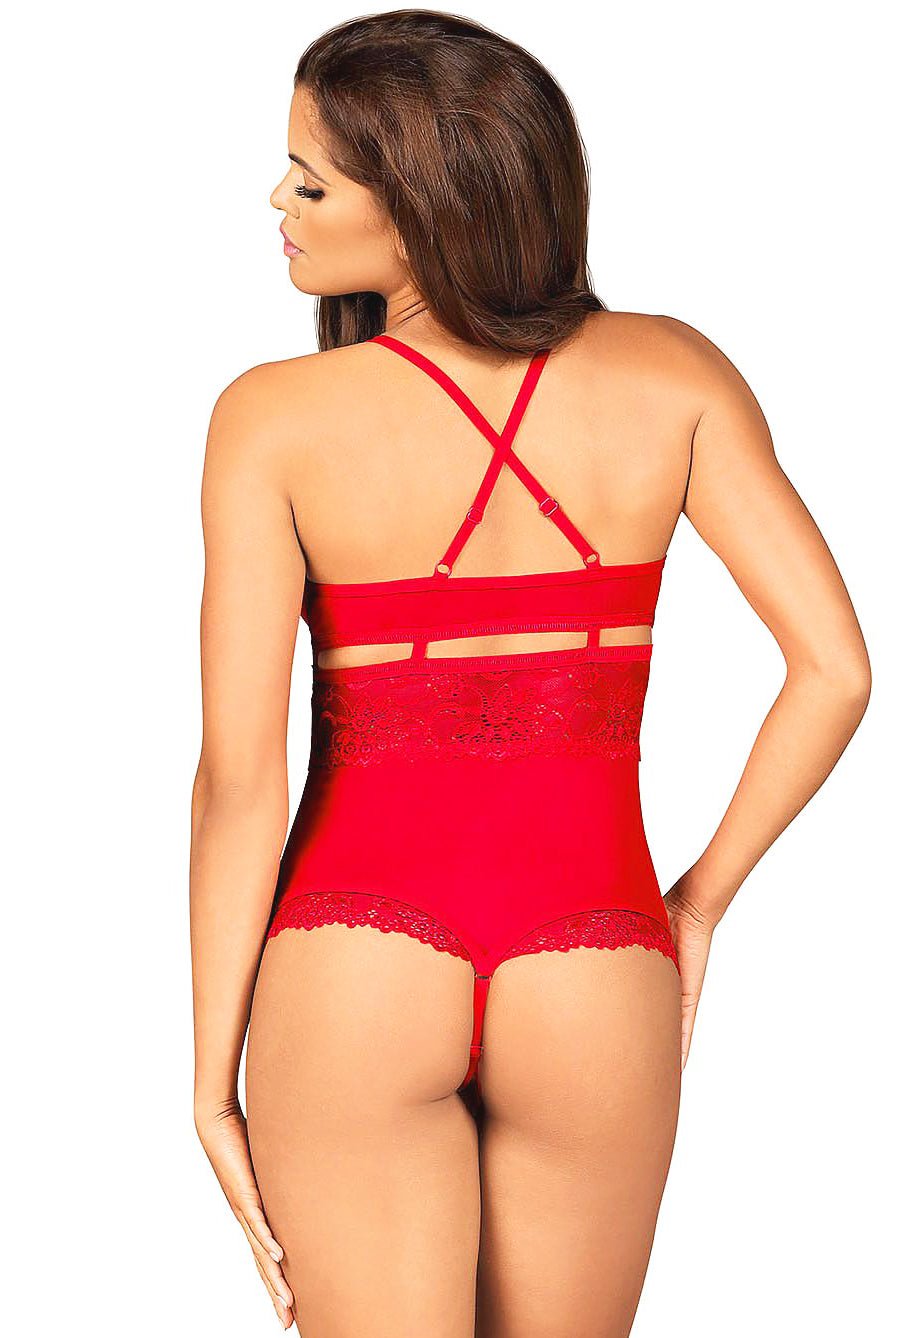 red sheer lace teddy